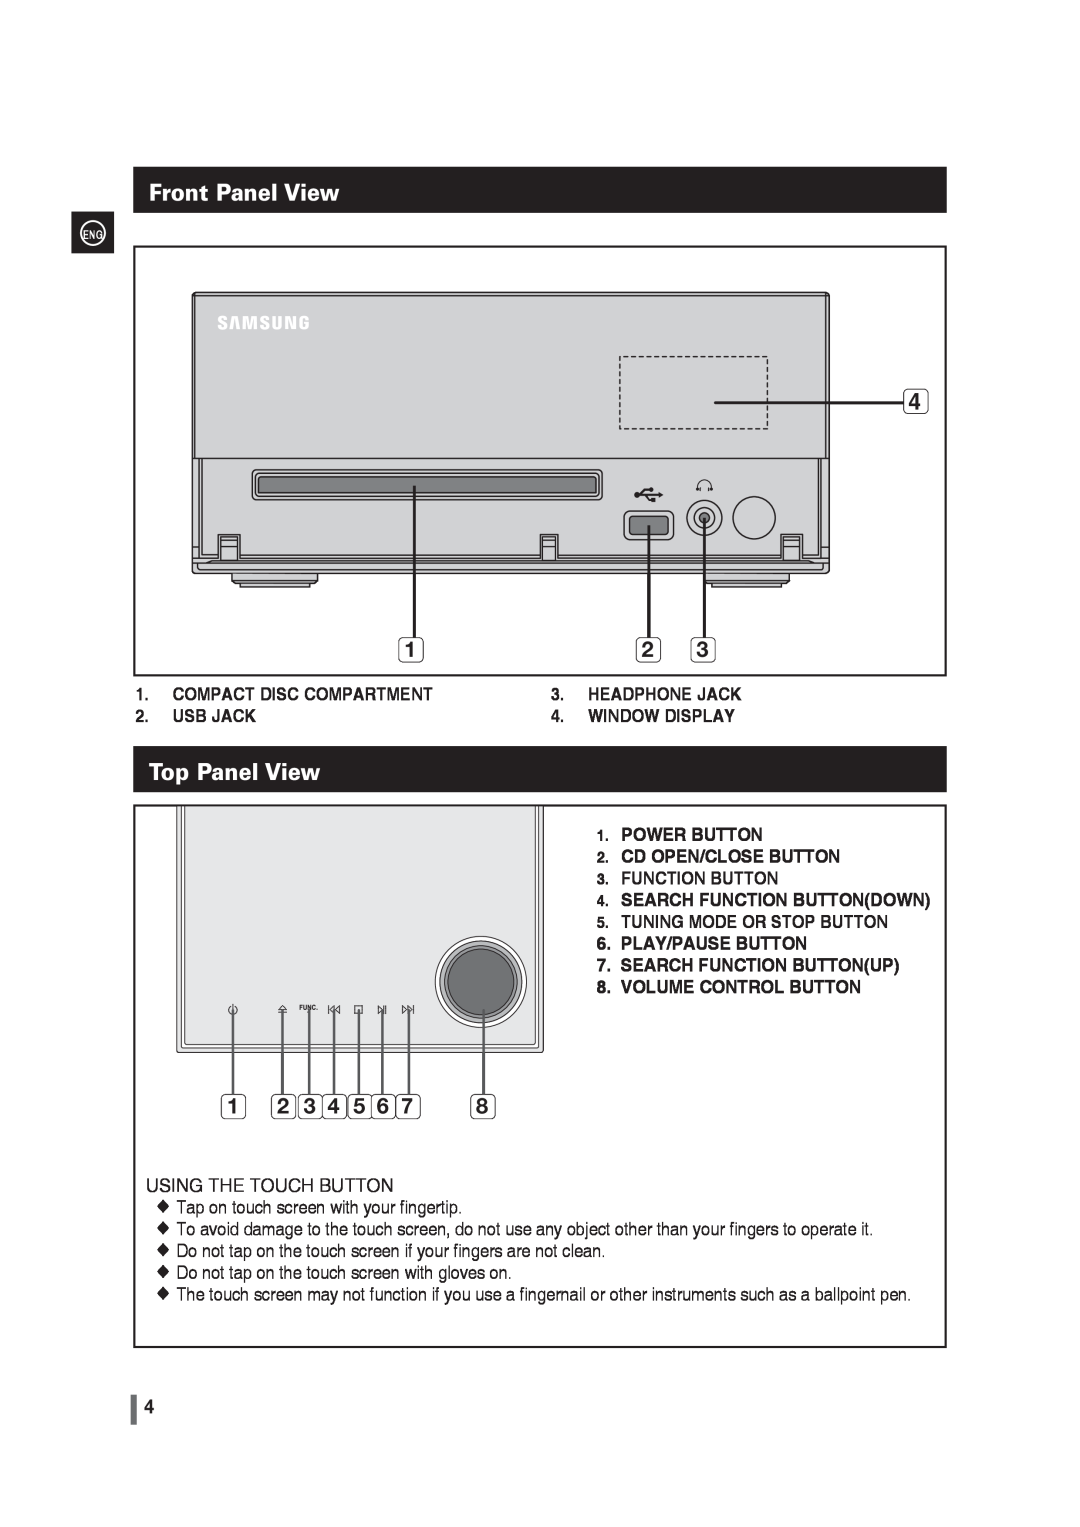 Samsung MM-G35 user manual Front Panel View, Top Panel View 